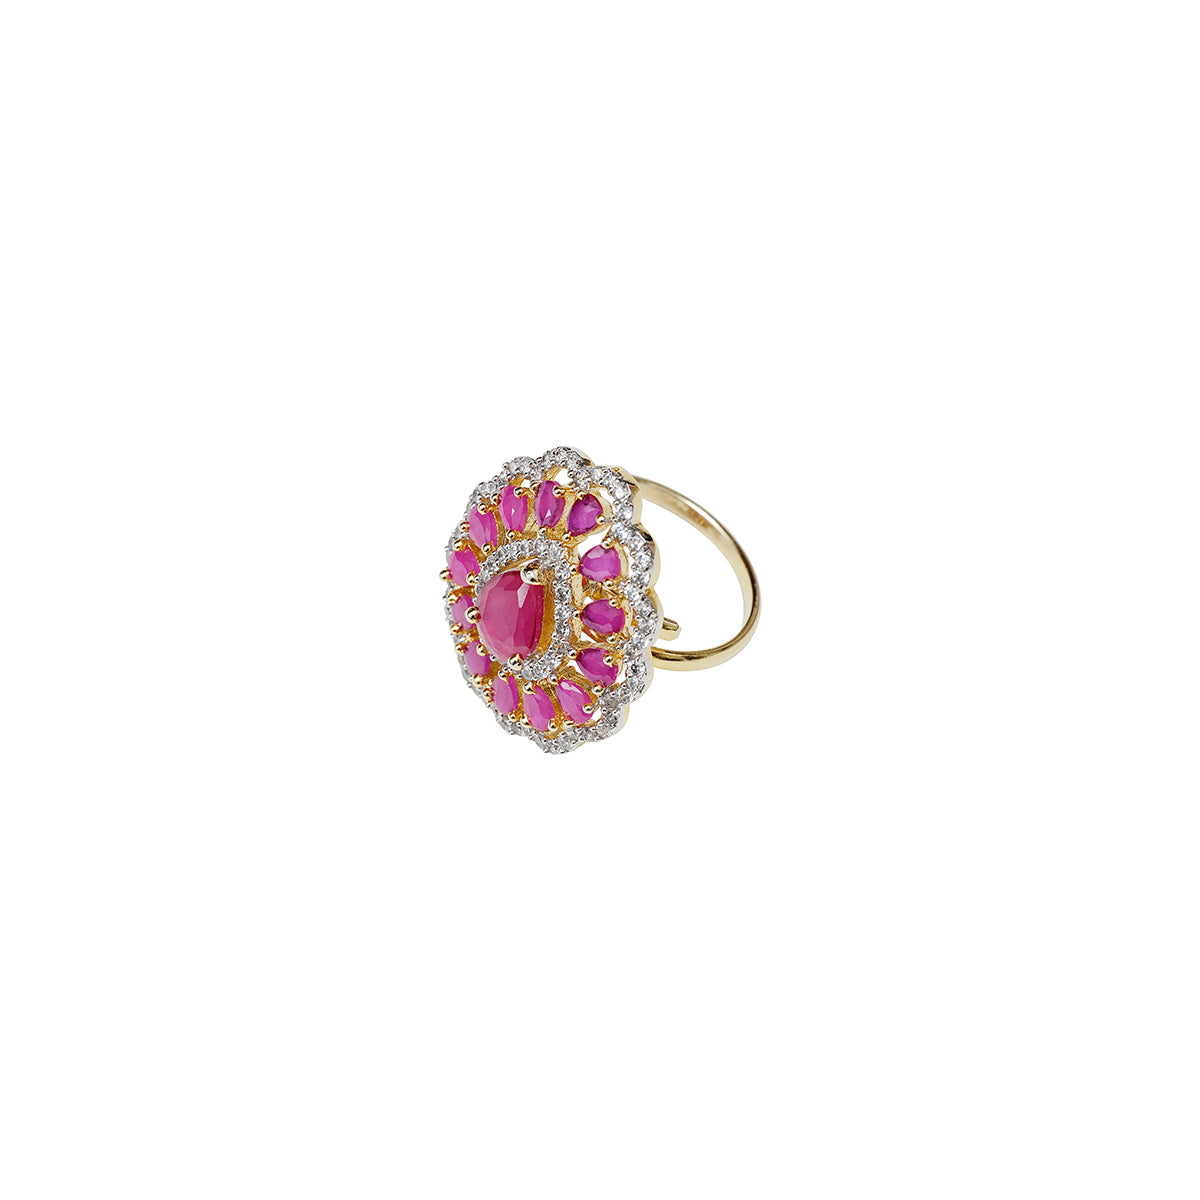 Pink and white ring, tear drop shape. mount gold. Thara ring from Maheswary Collection by Veronica Tharmalingam. Side view of the fuchsia and white stone detail 